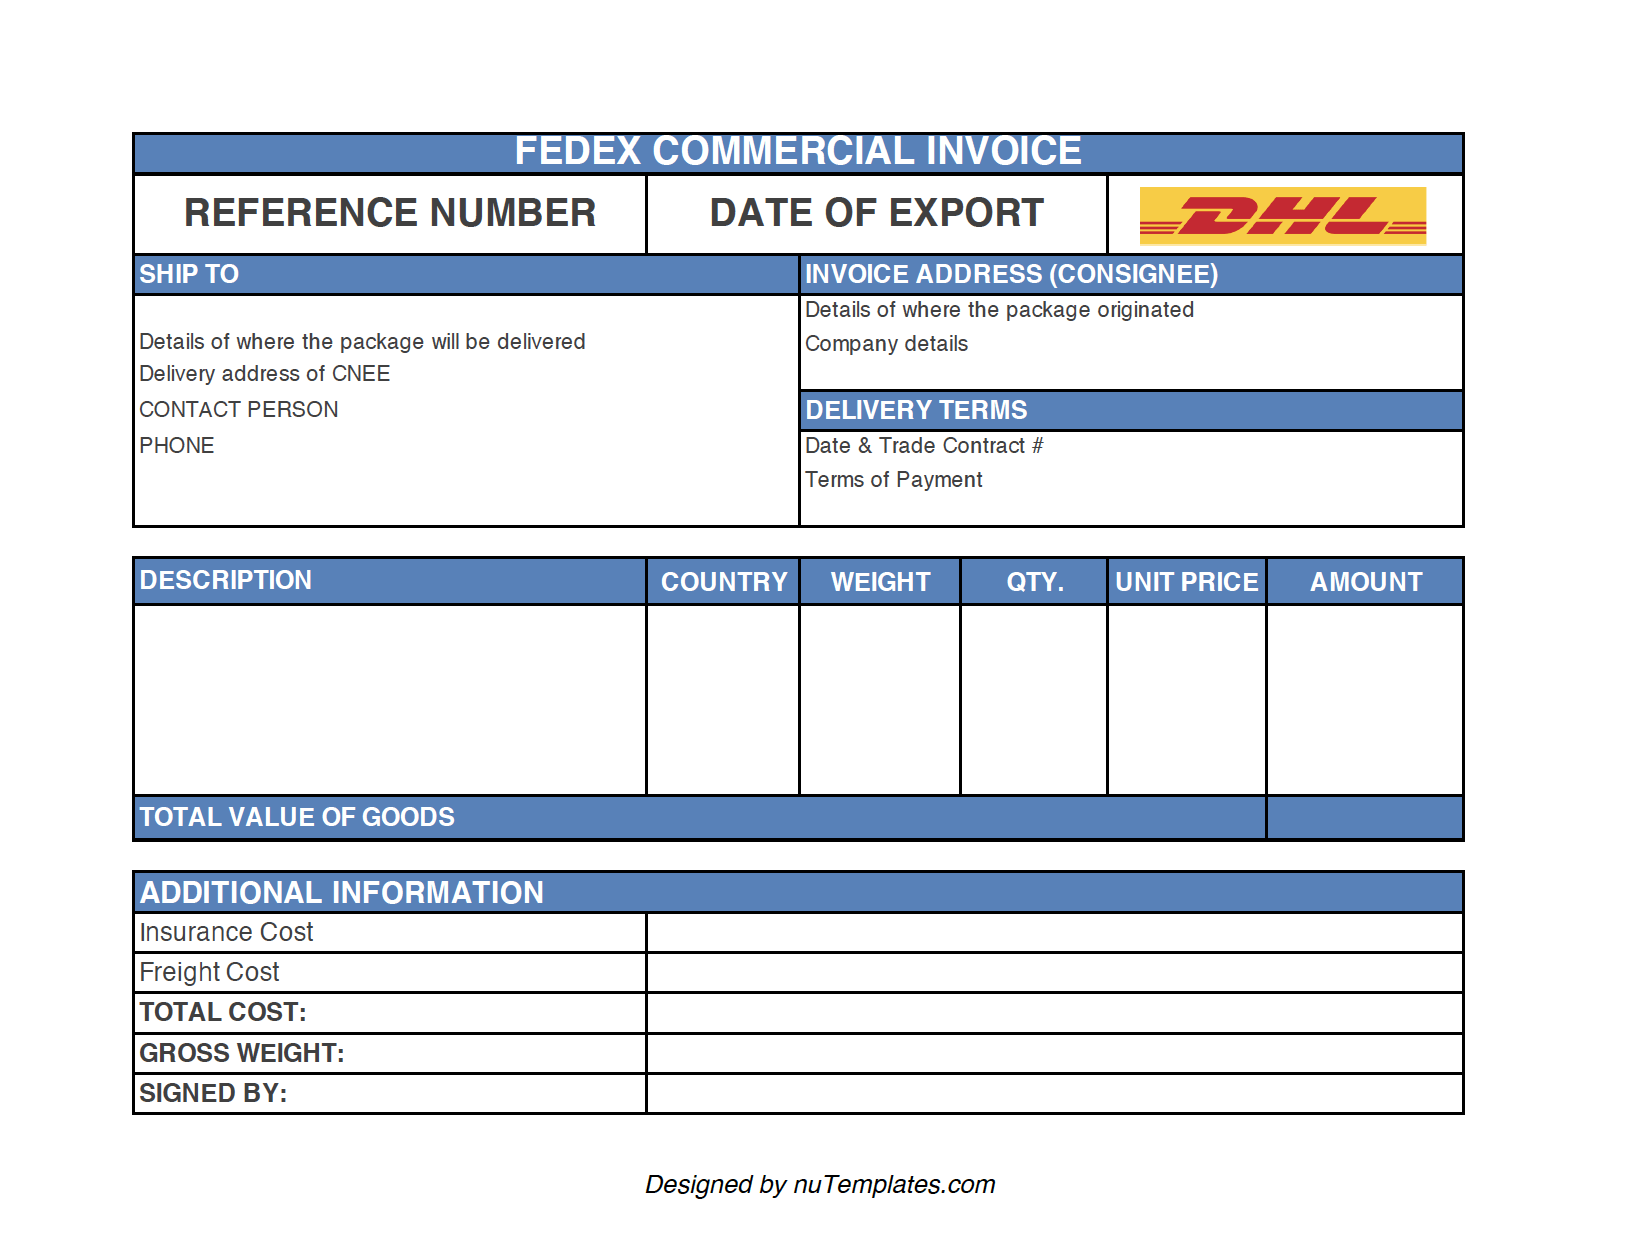 DHL Commercial Invoice Template - DHL Invoices  nuTemplates For Commercial Invoice Template Word Doc